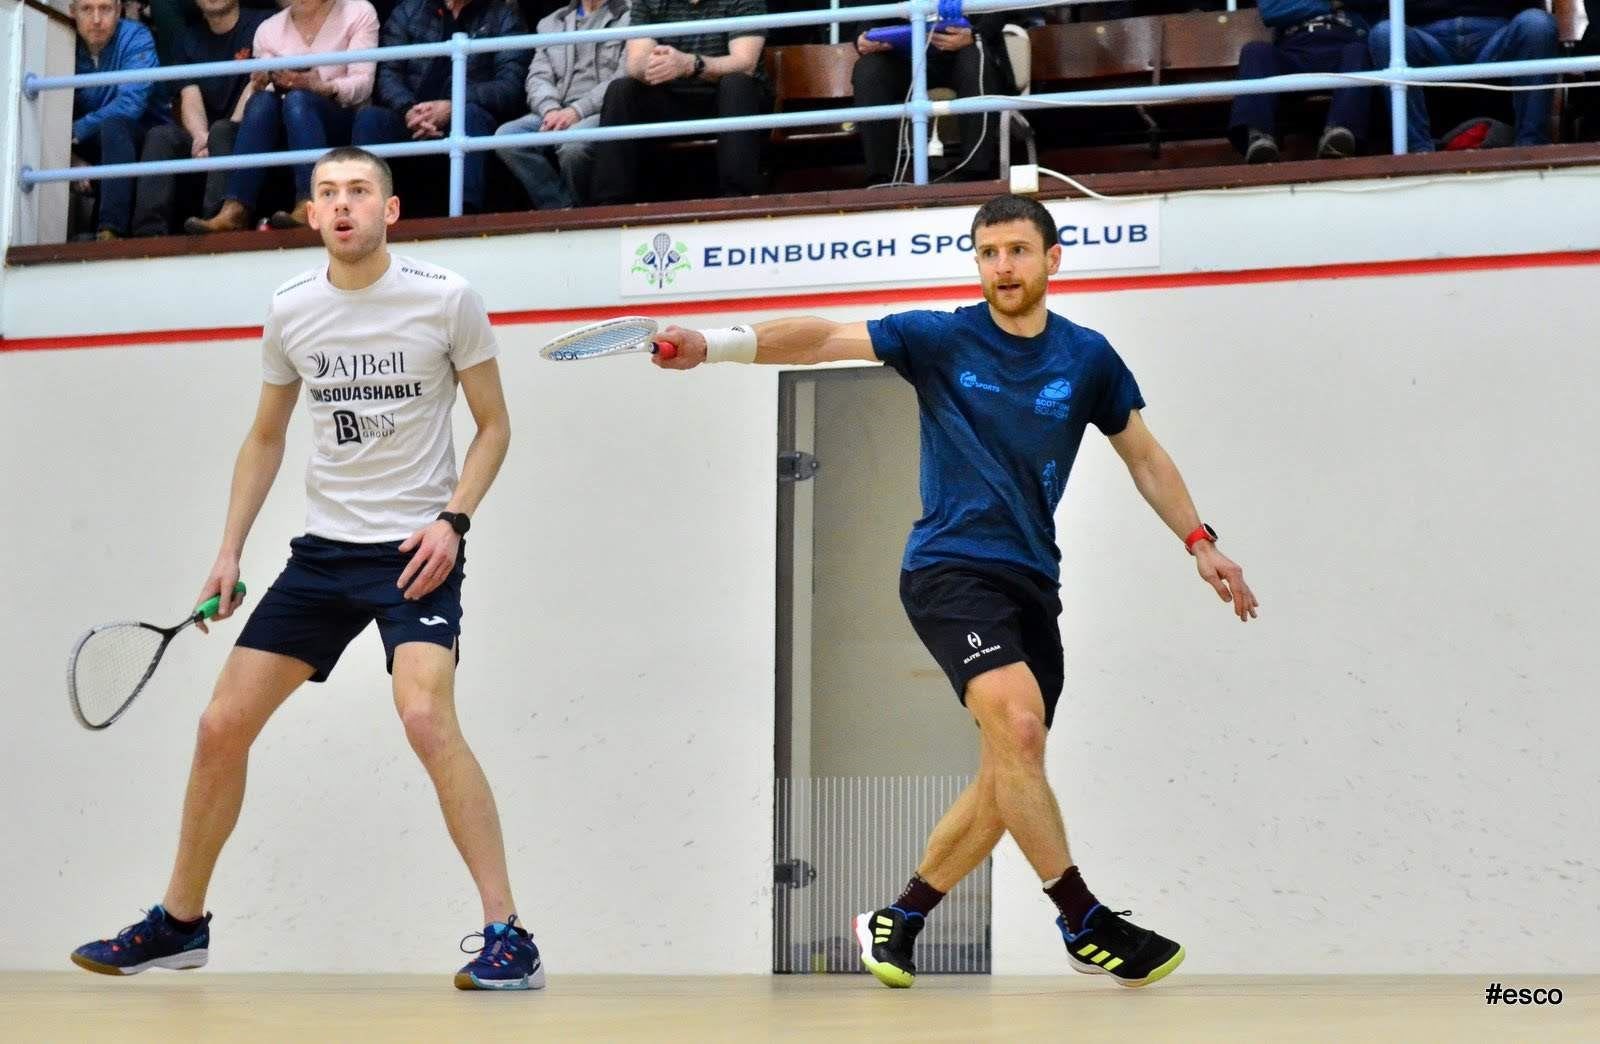 Images by Steve Cubbins - Alan Clyne (blue top) in action against fellow Scot Rory Stewart at the 2020 Edinburgh Sports Club Open held in February.